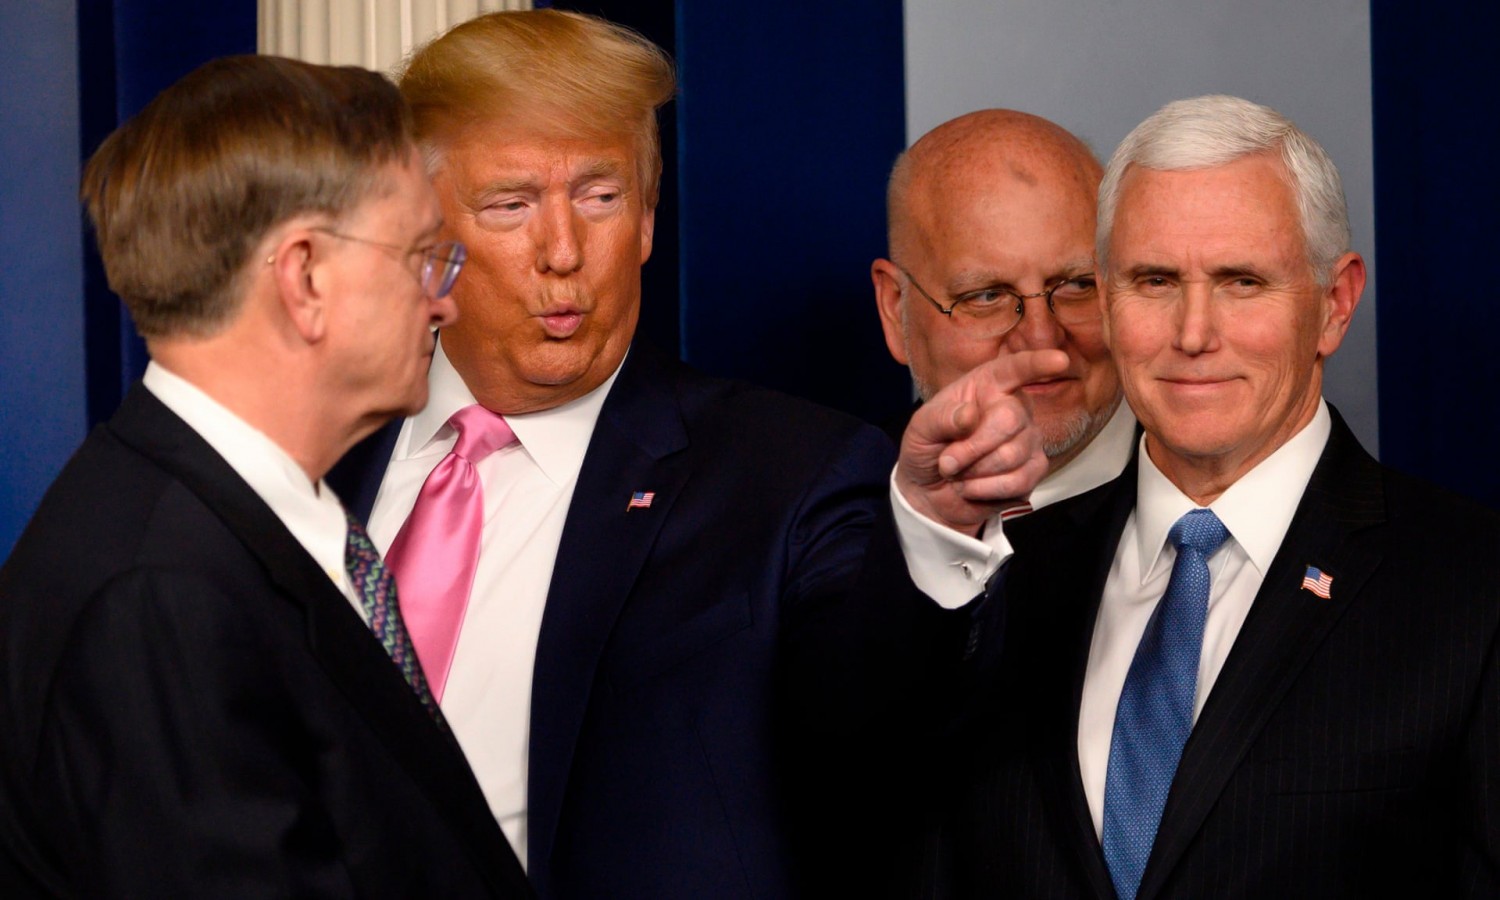 US President Donald Trump (2nd L) flanked by US Vice President Mike Pence (R), after speaking at a news conference on the COVID-19 outbreak at the White House on February 26. Photograph: Andrew Caballero-Reynolds/AFP via Getty 